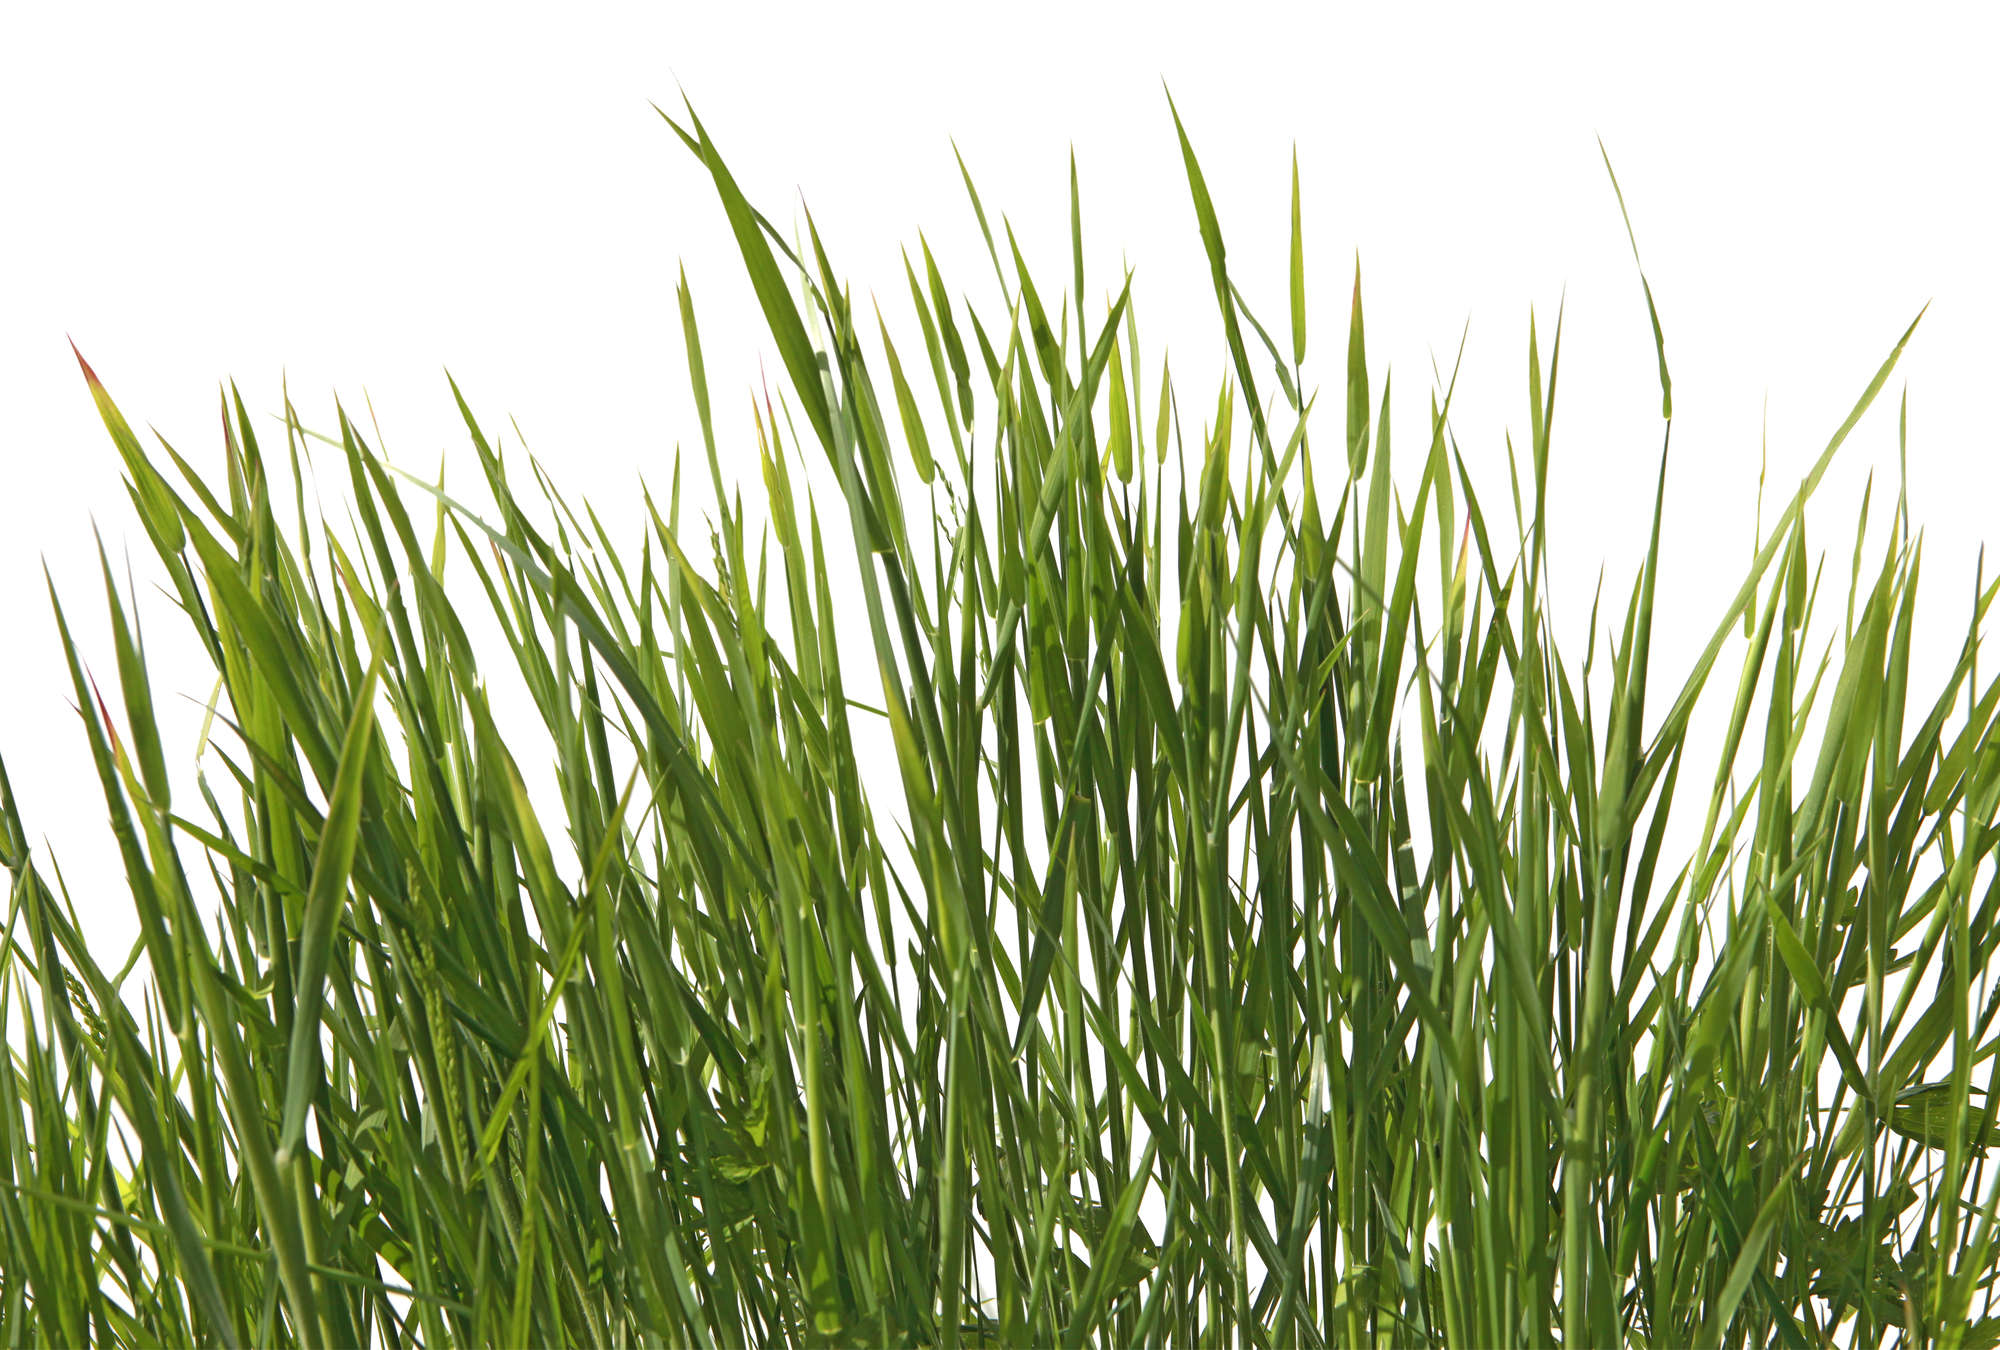             Photo wallpaper grasses detail with white background
        